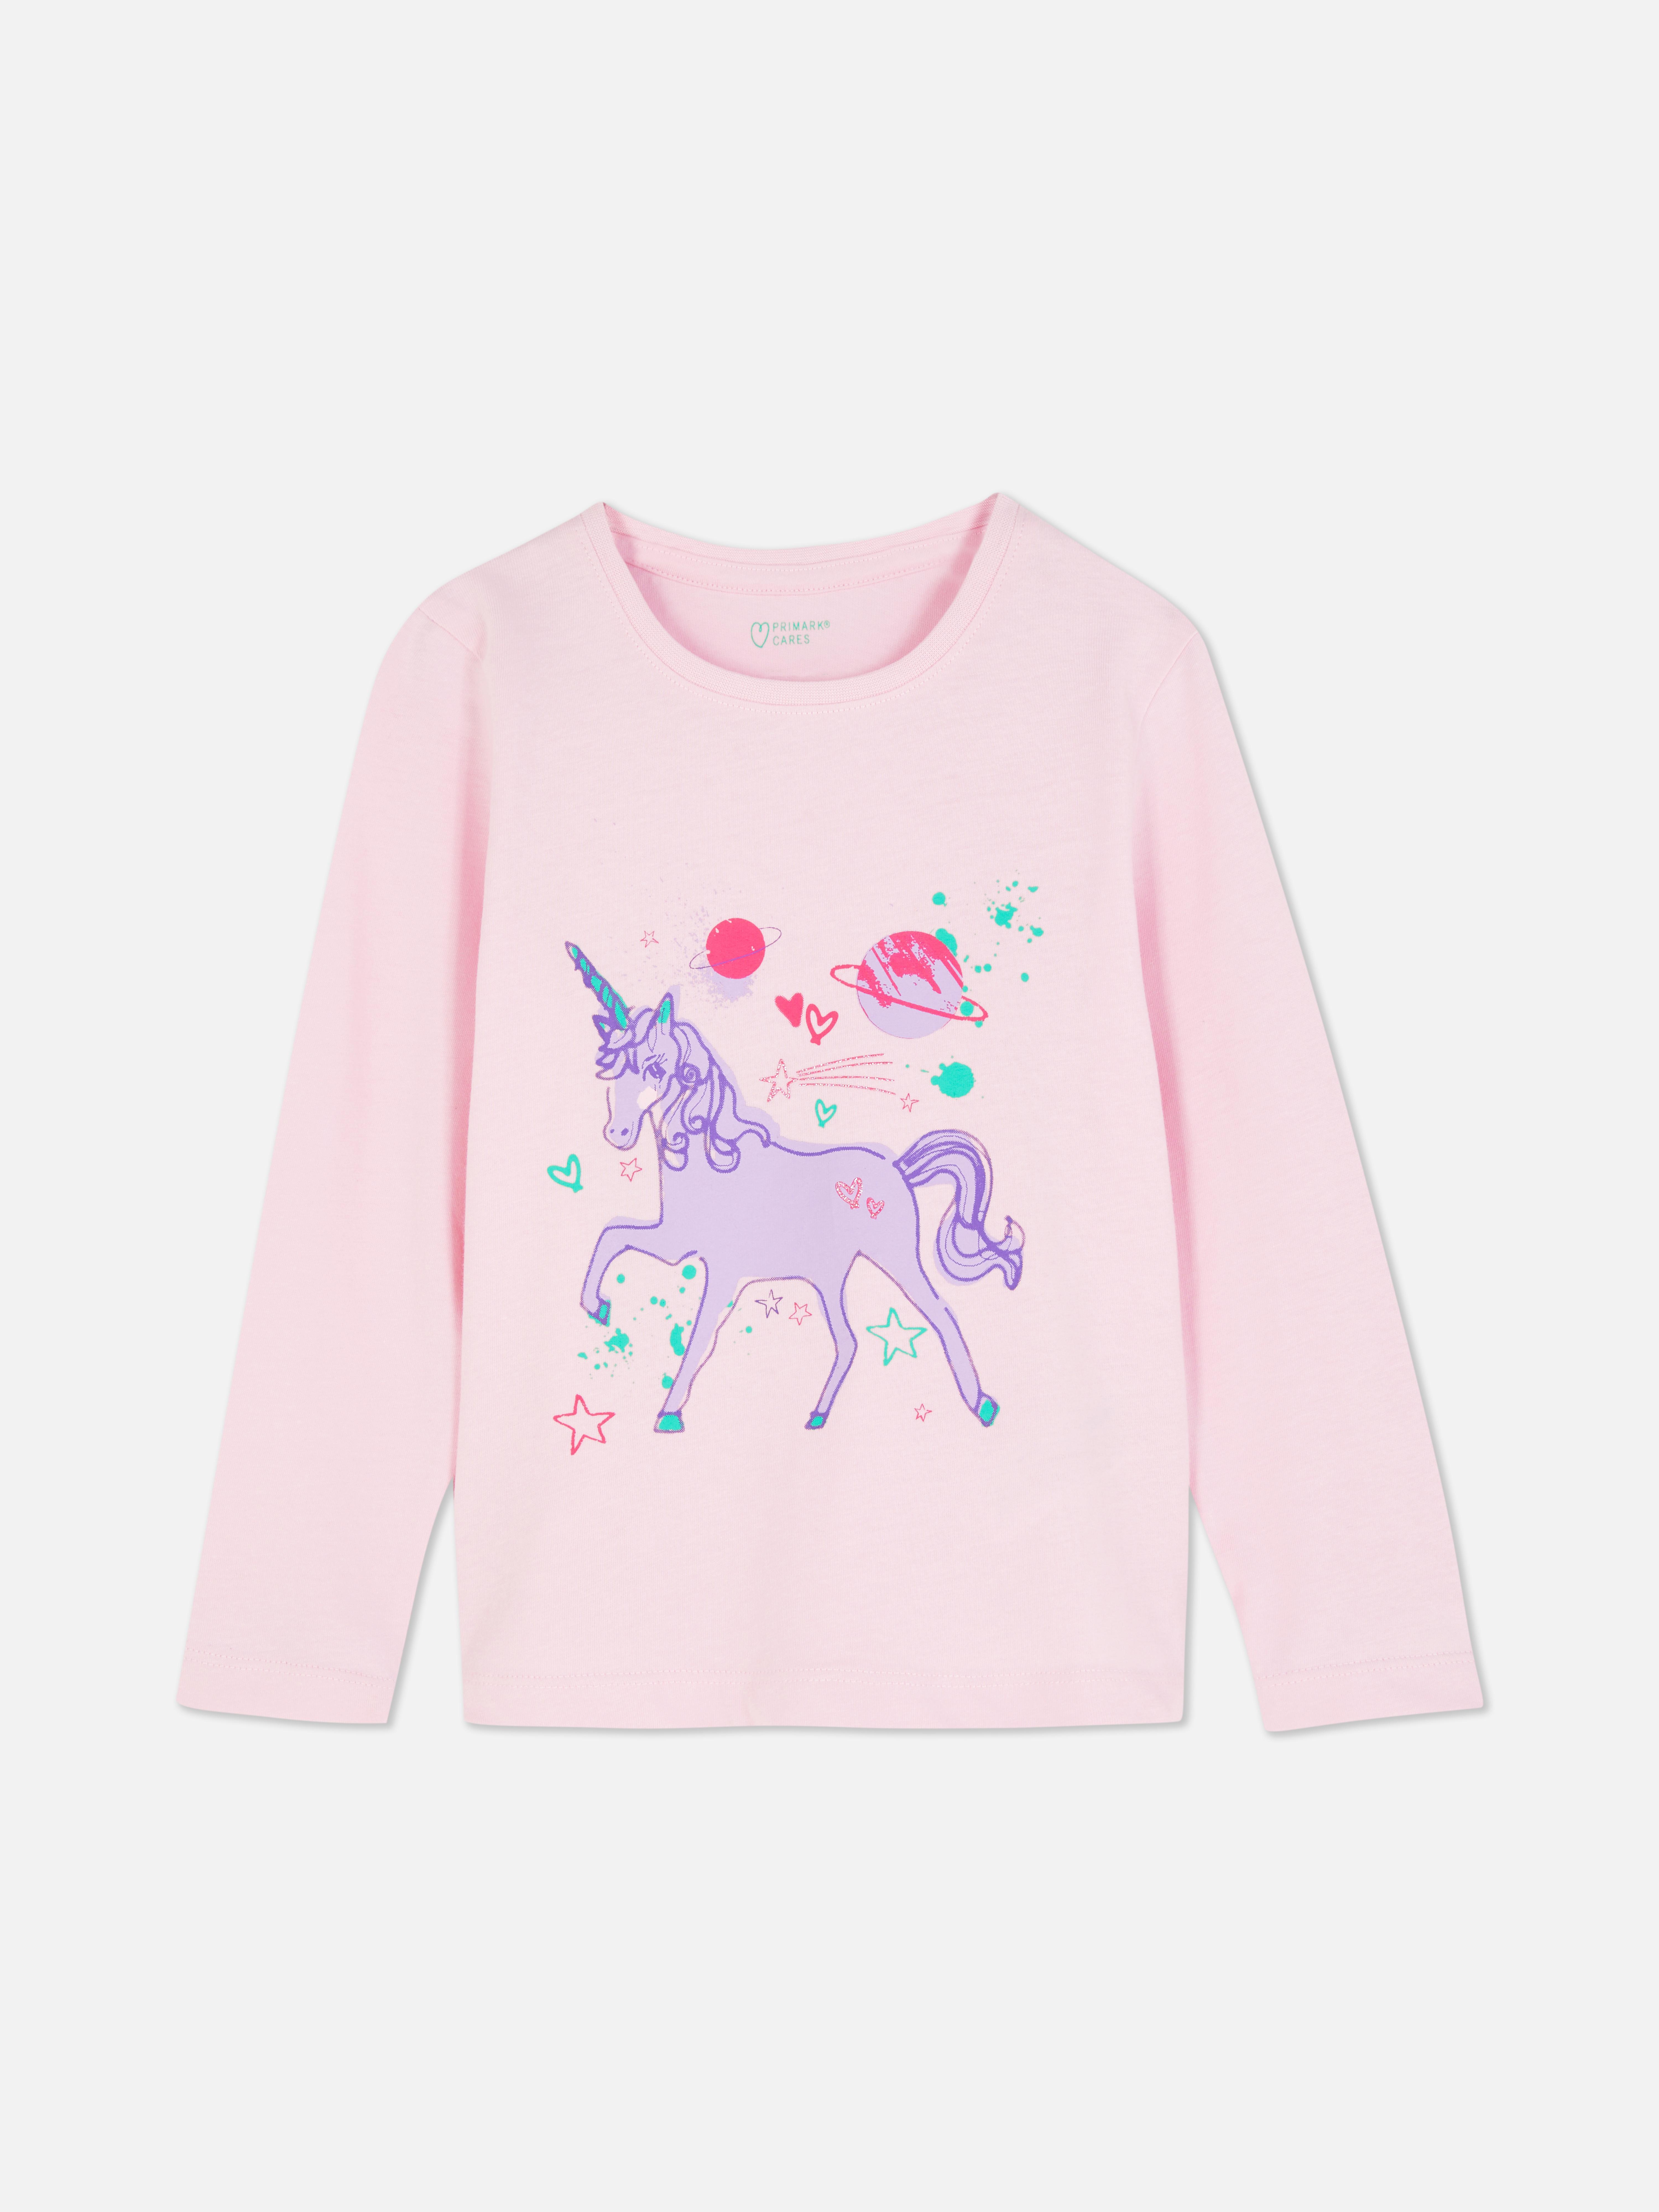 Girls' Tops & T-Shirts | Ribbed, Multipack & Long Sleeve Tops | Primark